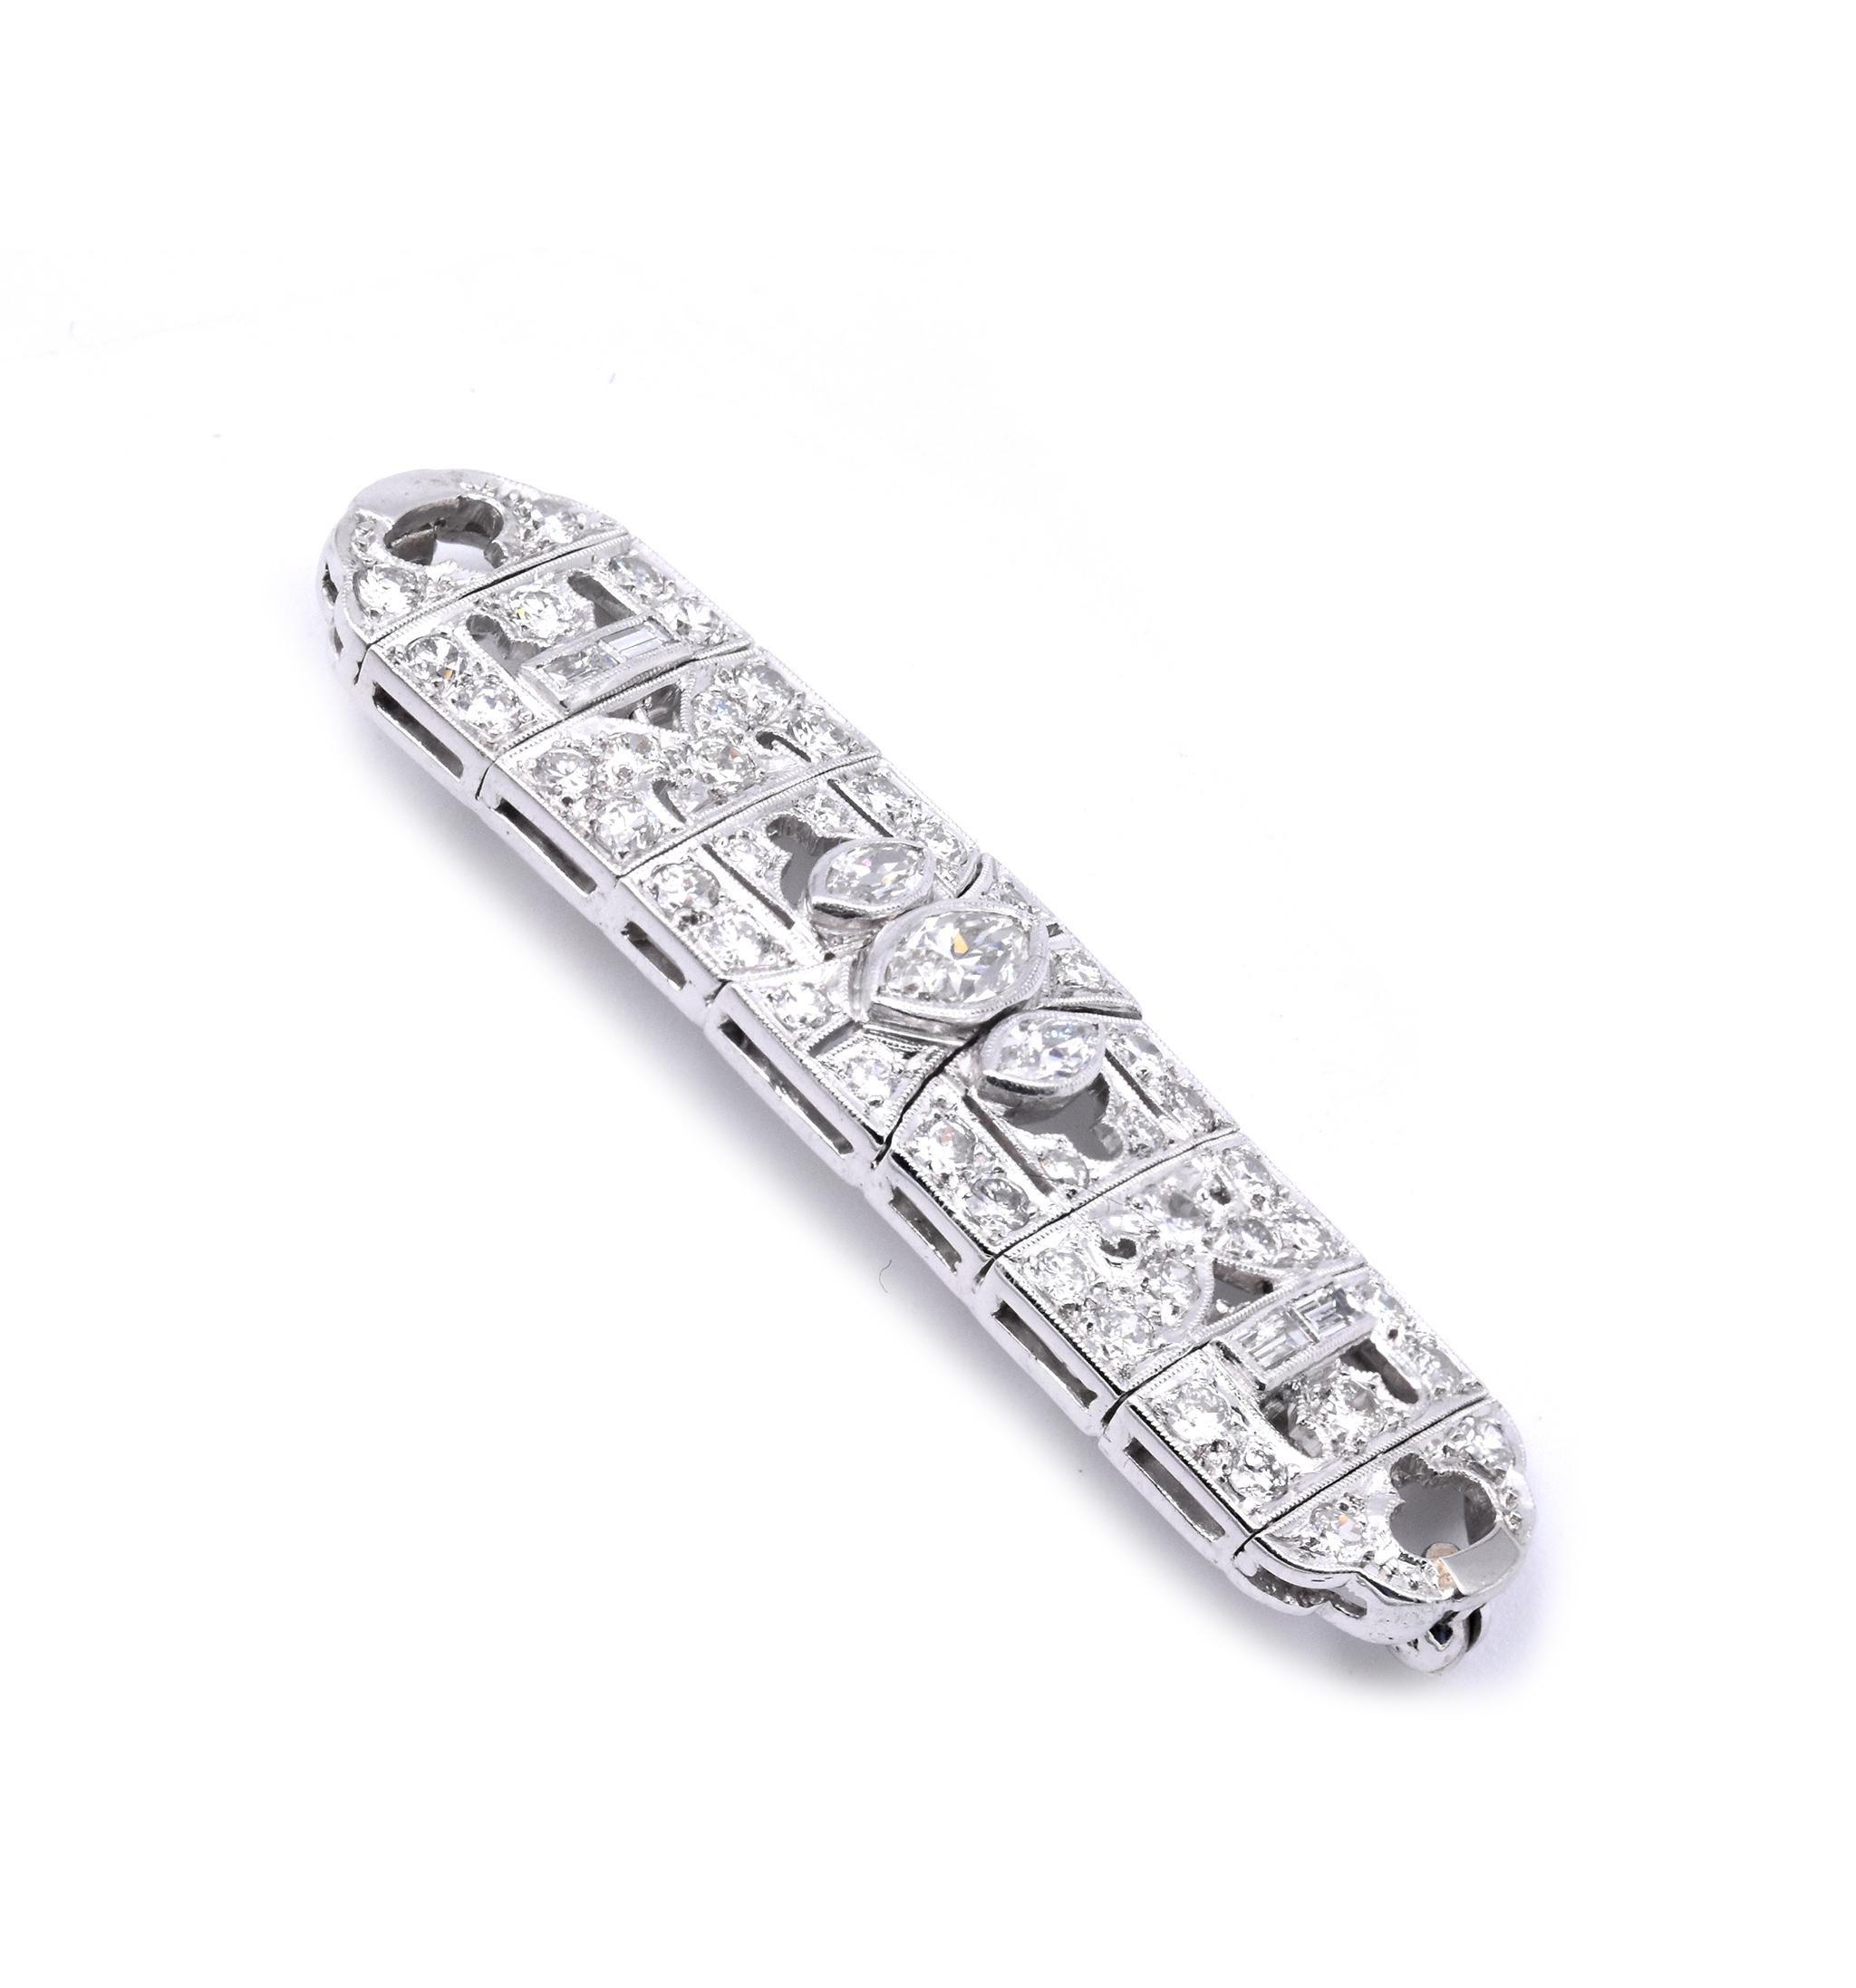 Designer: custom
Material: Platinum
Diamond: 3 marquise cut = .63cttw 
Diamond: 2 baguette cut = .12cttw
Diamond: 44 round cut = 2.20cttw
Dimensions: pin is approximately 51mm X 12.85mm
Weight: 13.3 grams
